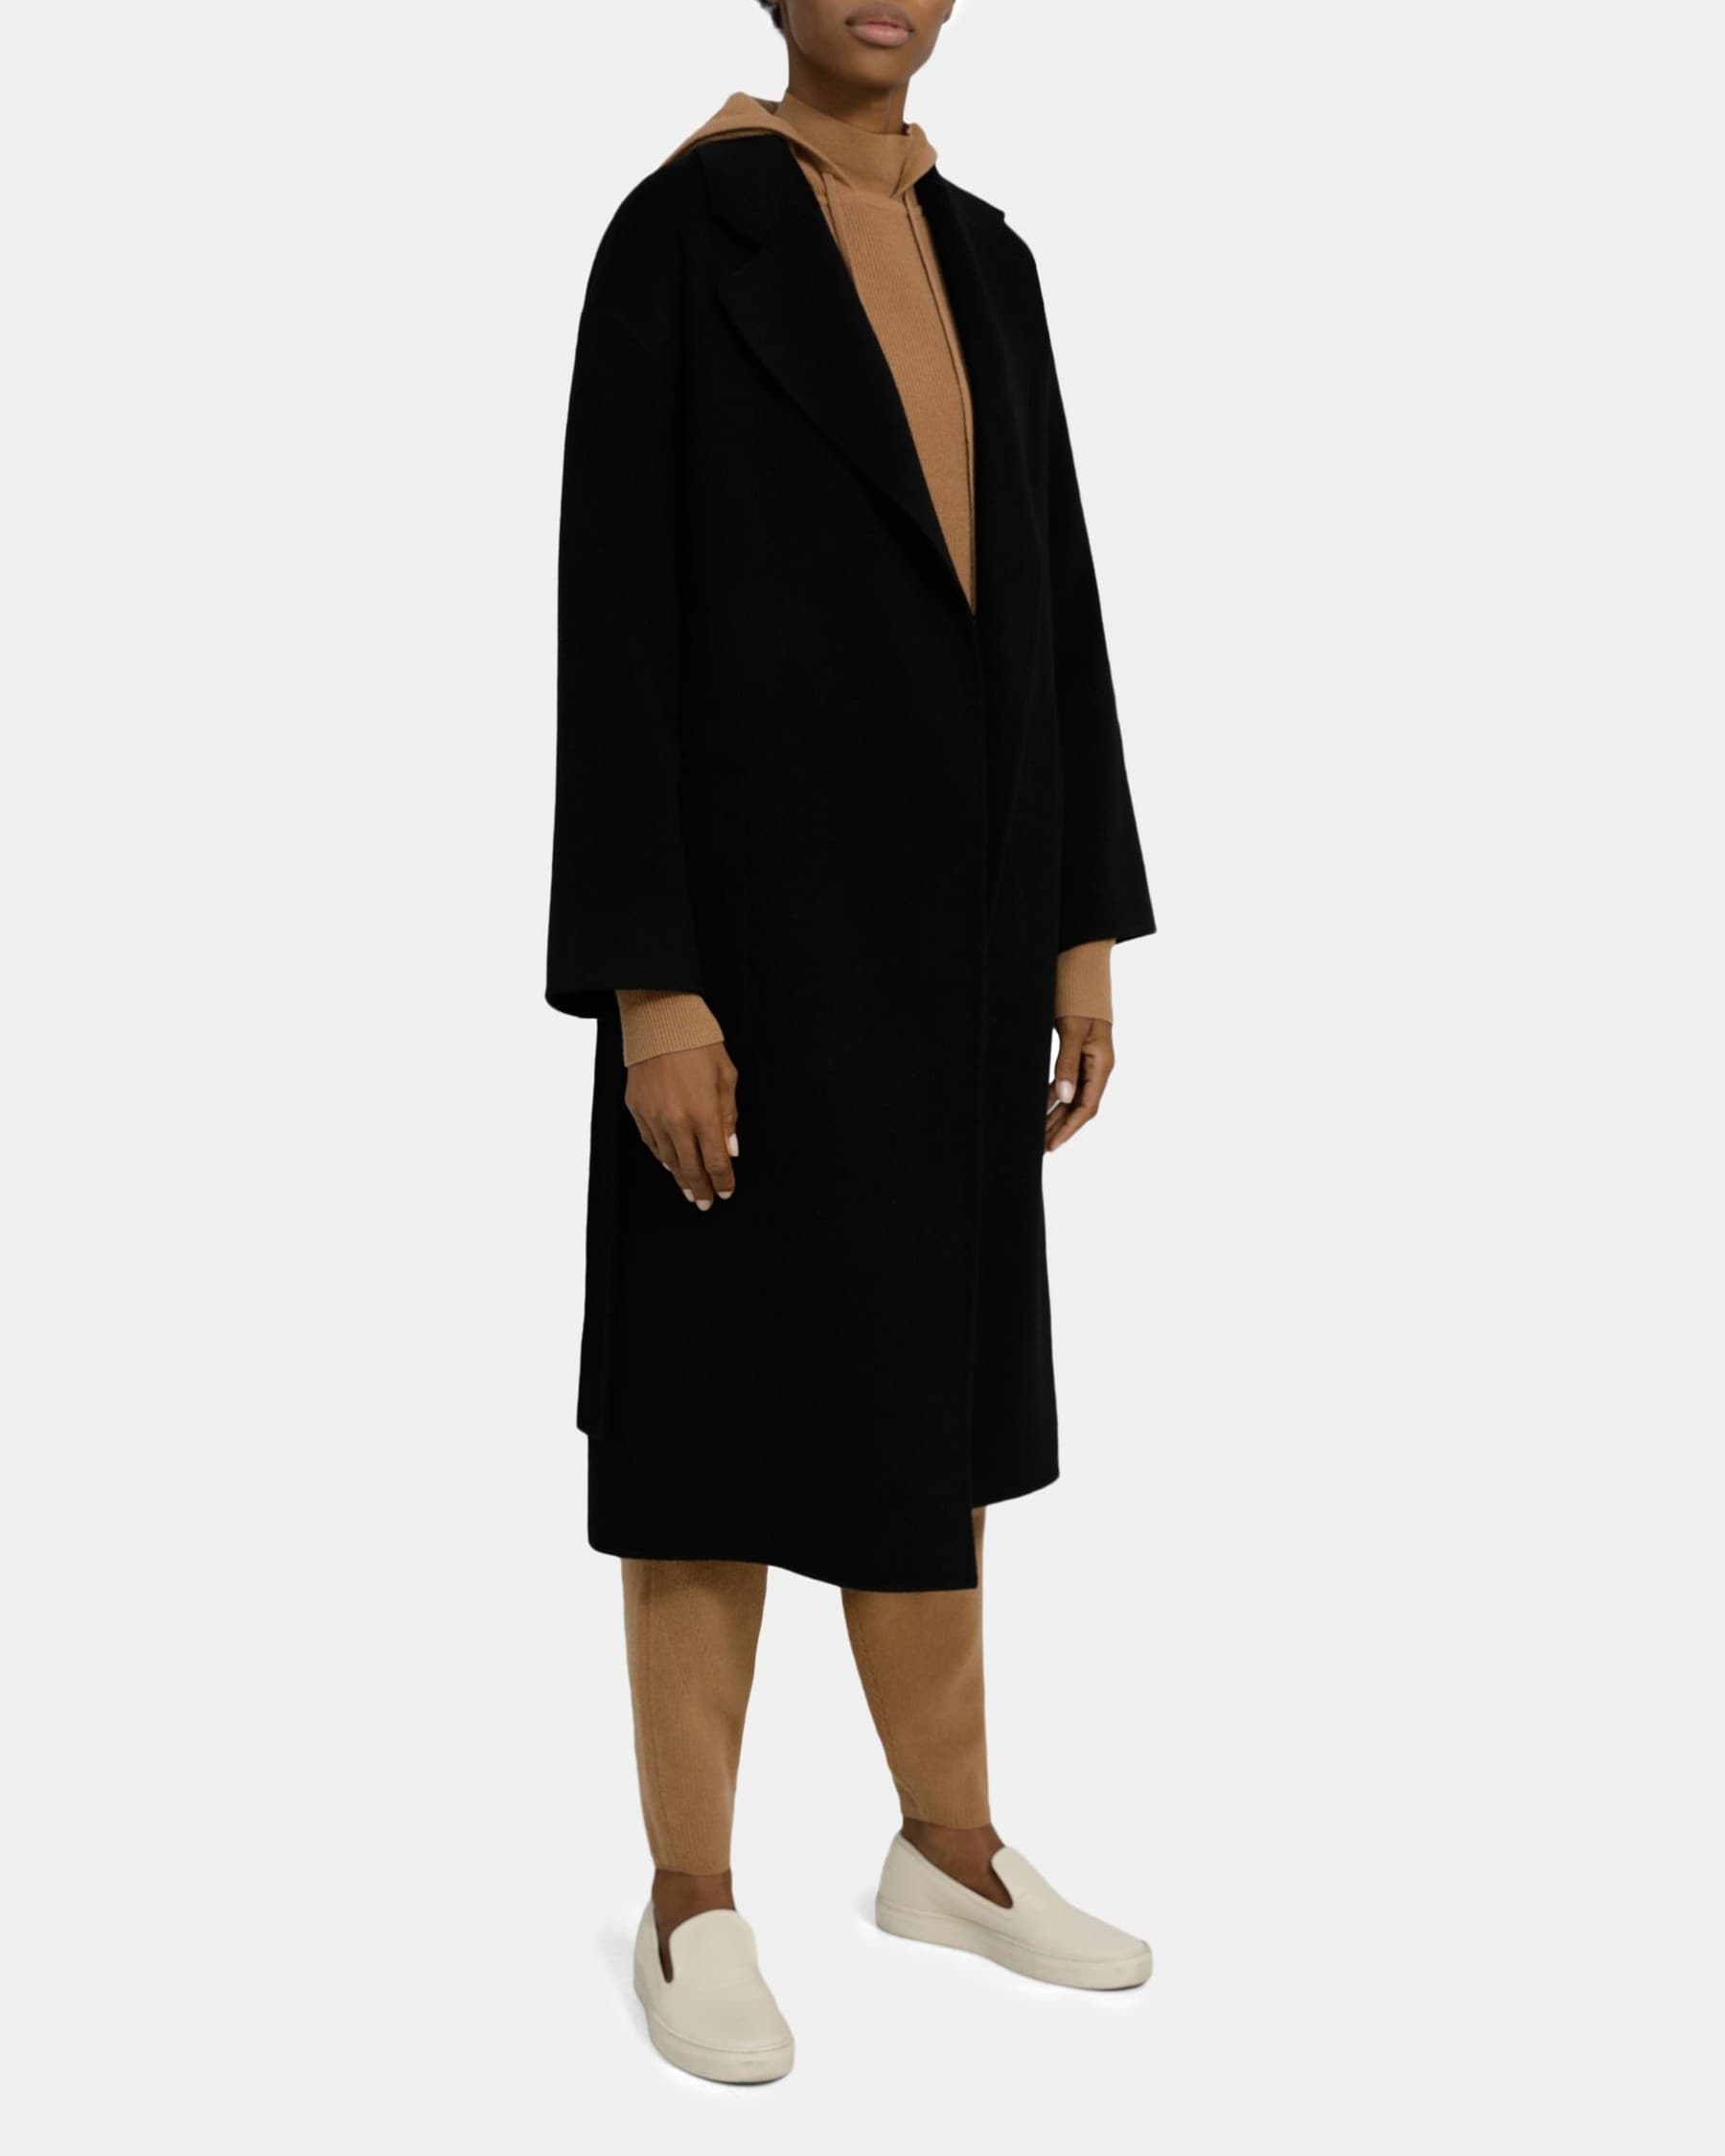 Theory Robe Coat in Double-Face Wool-Cashmere